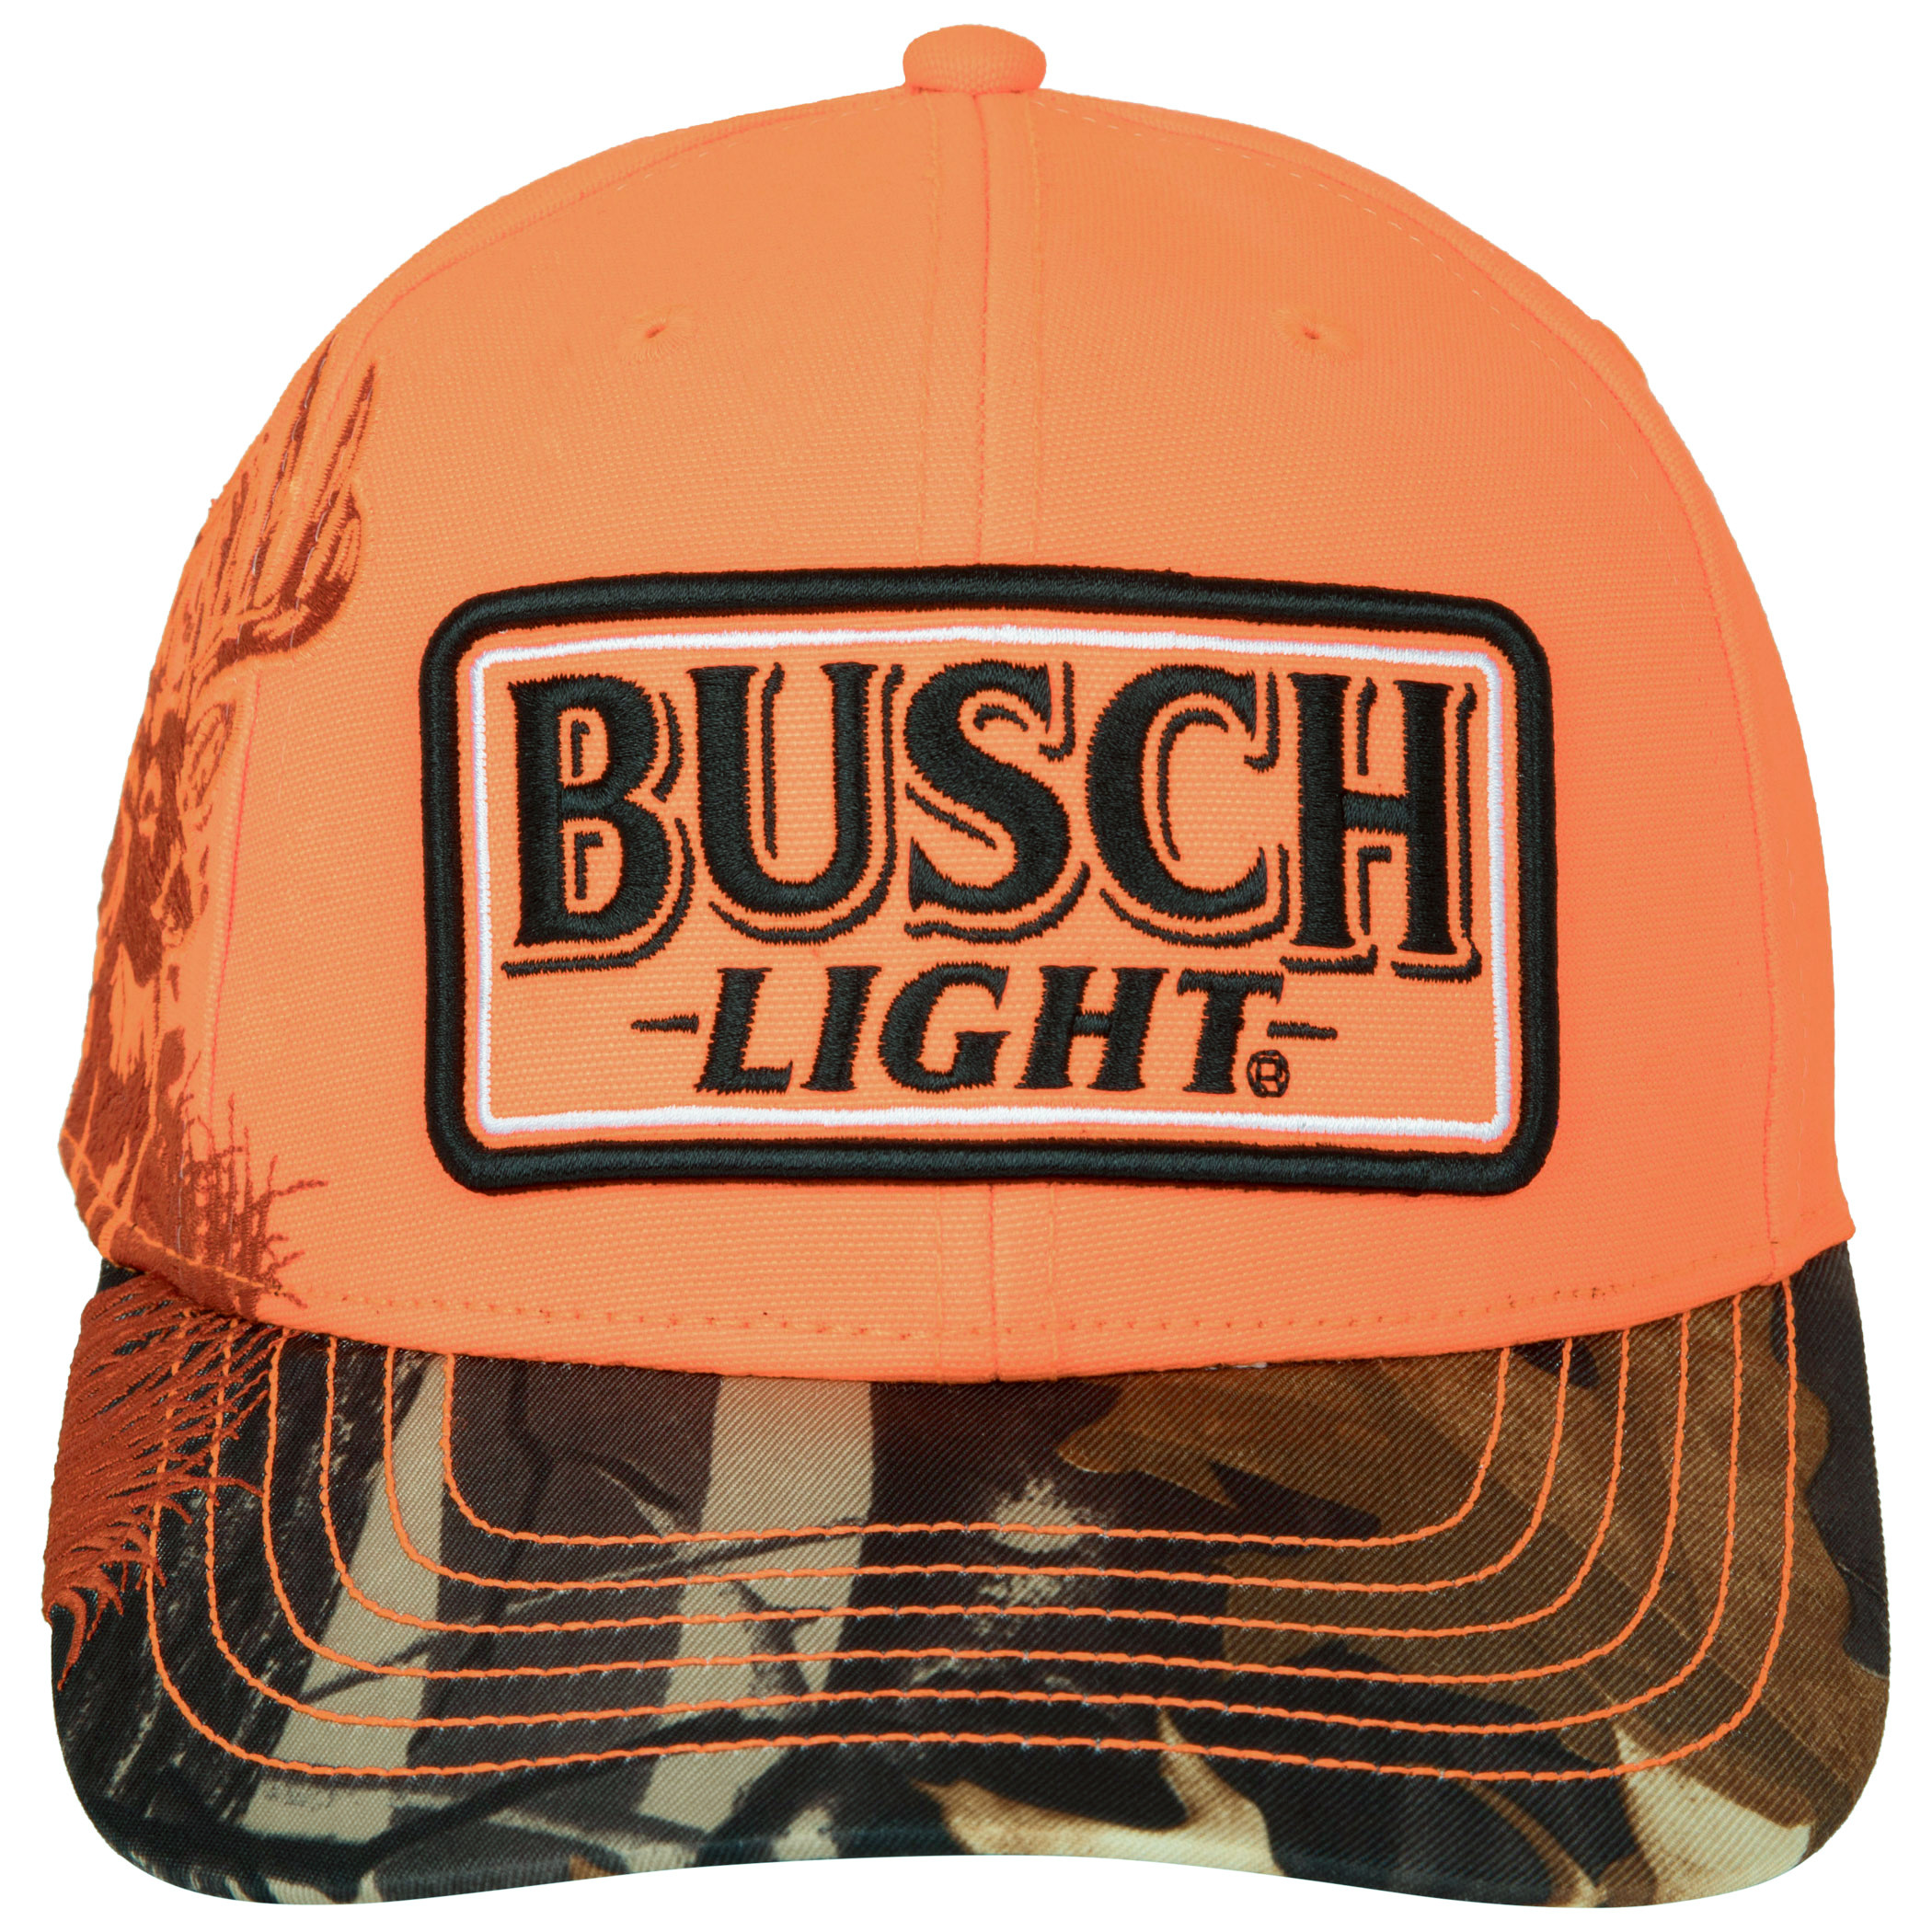 Busch Light RealTree Camo Hoodie - The Beer Gear Store